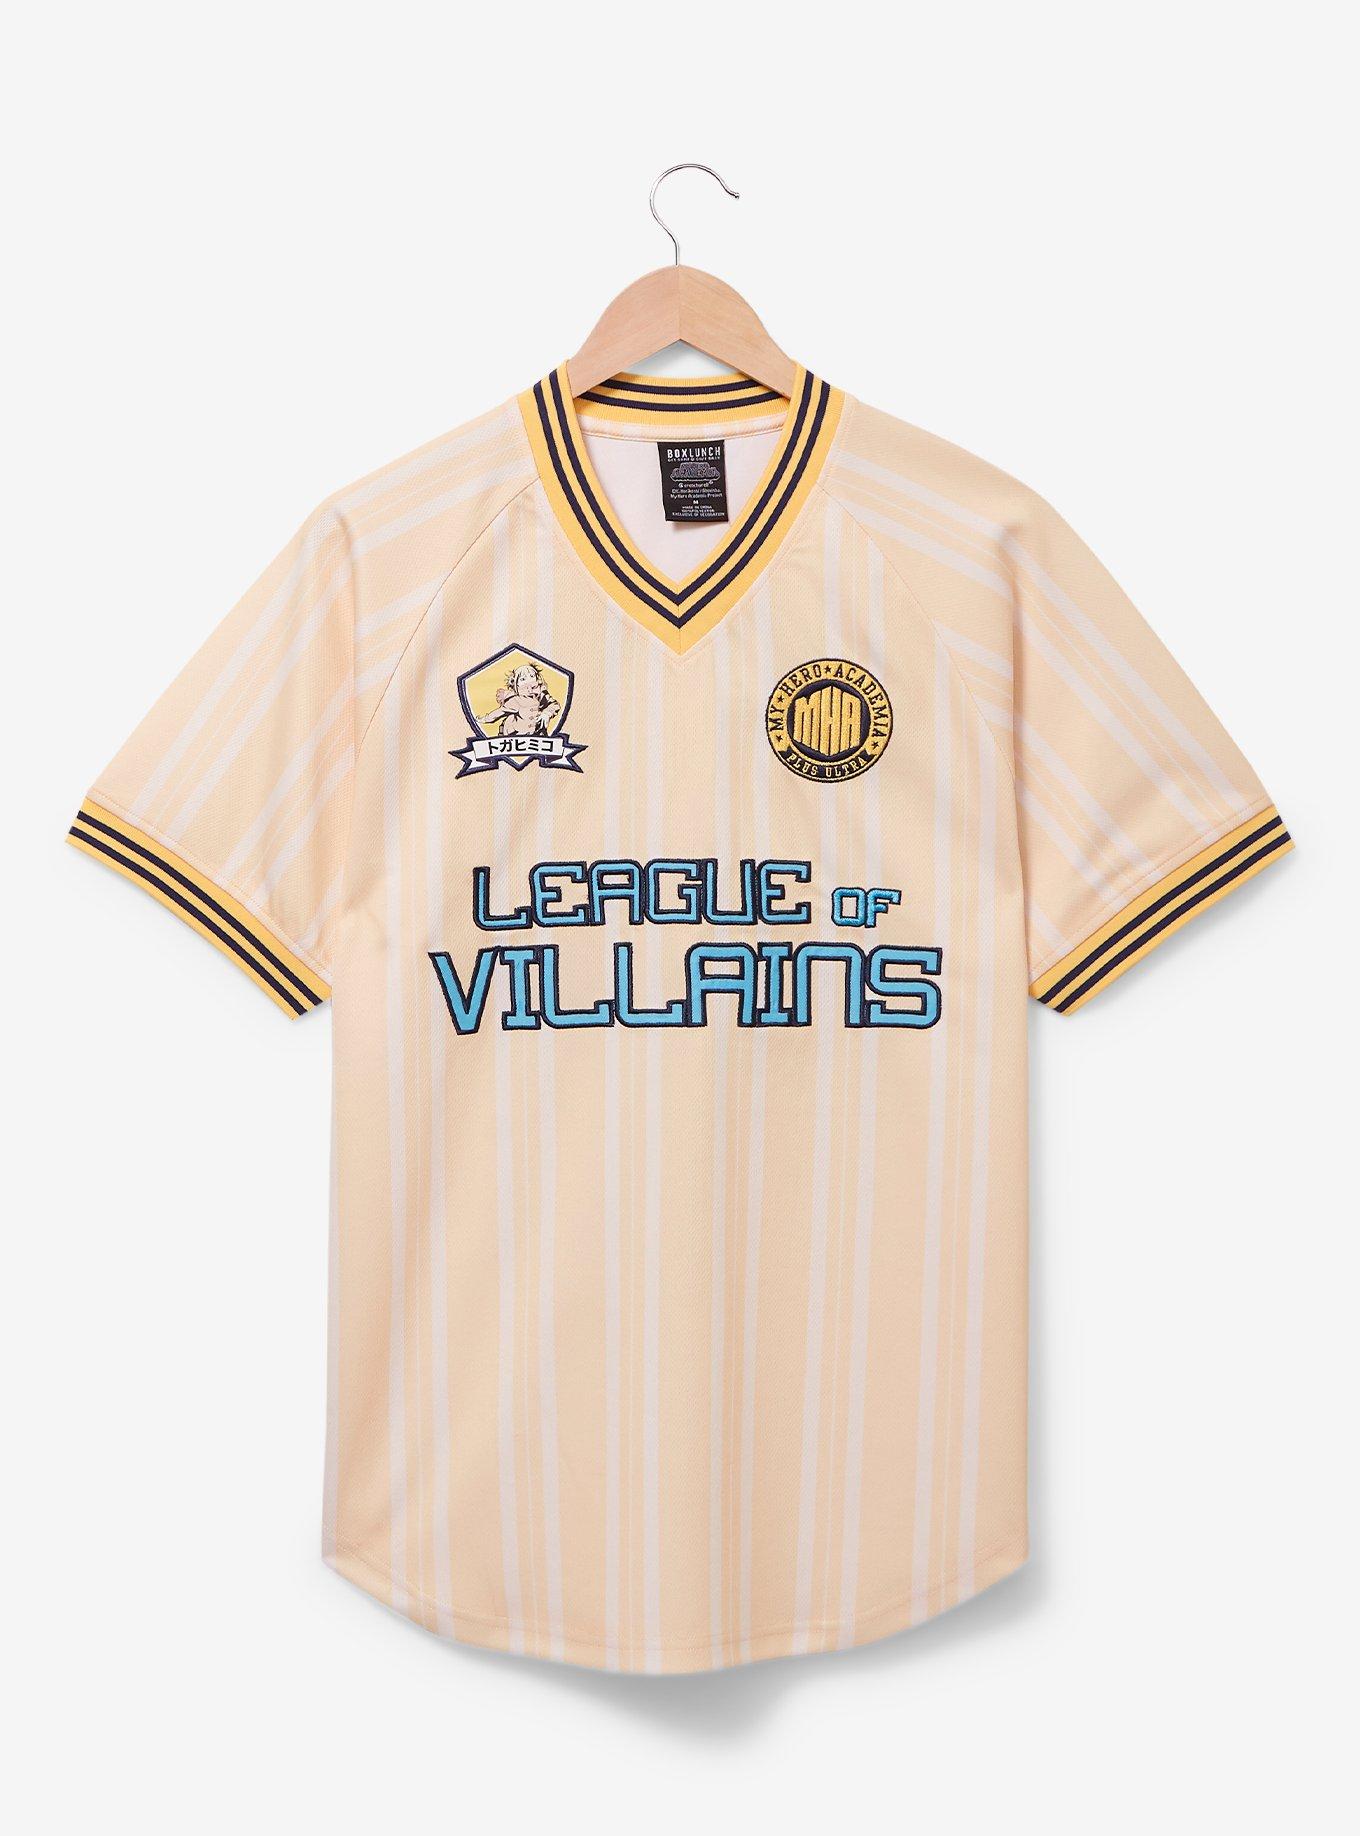 My Hero Academia League of Villains Soccer Jersey - BoxLunch Exclusive, TANBEIGE, hi-res